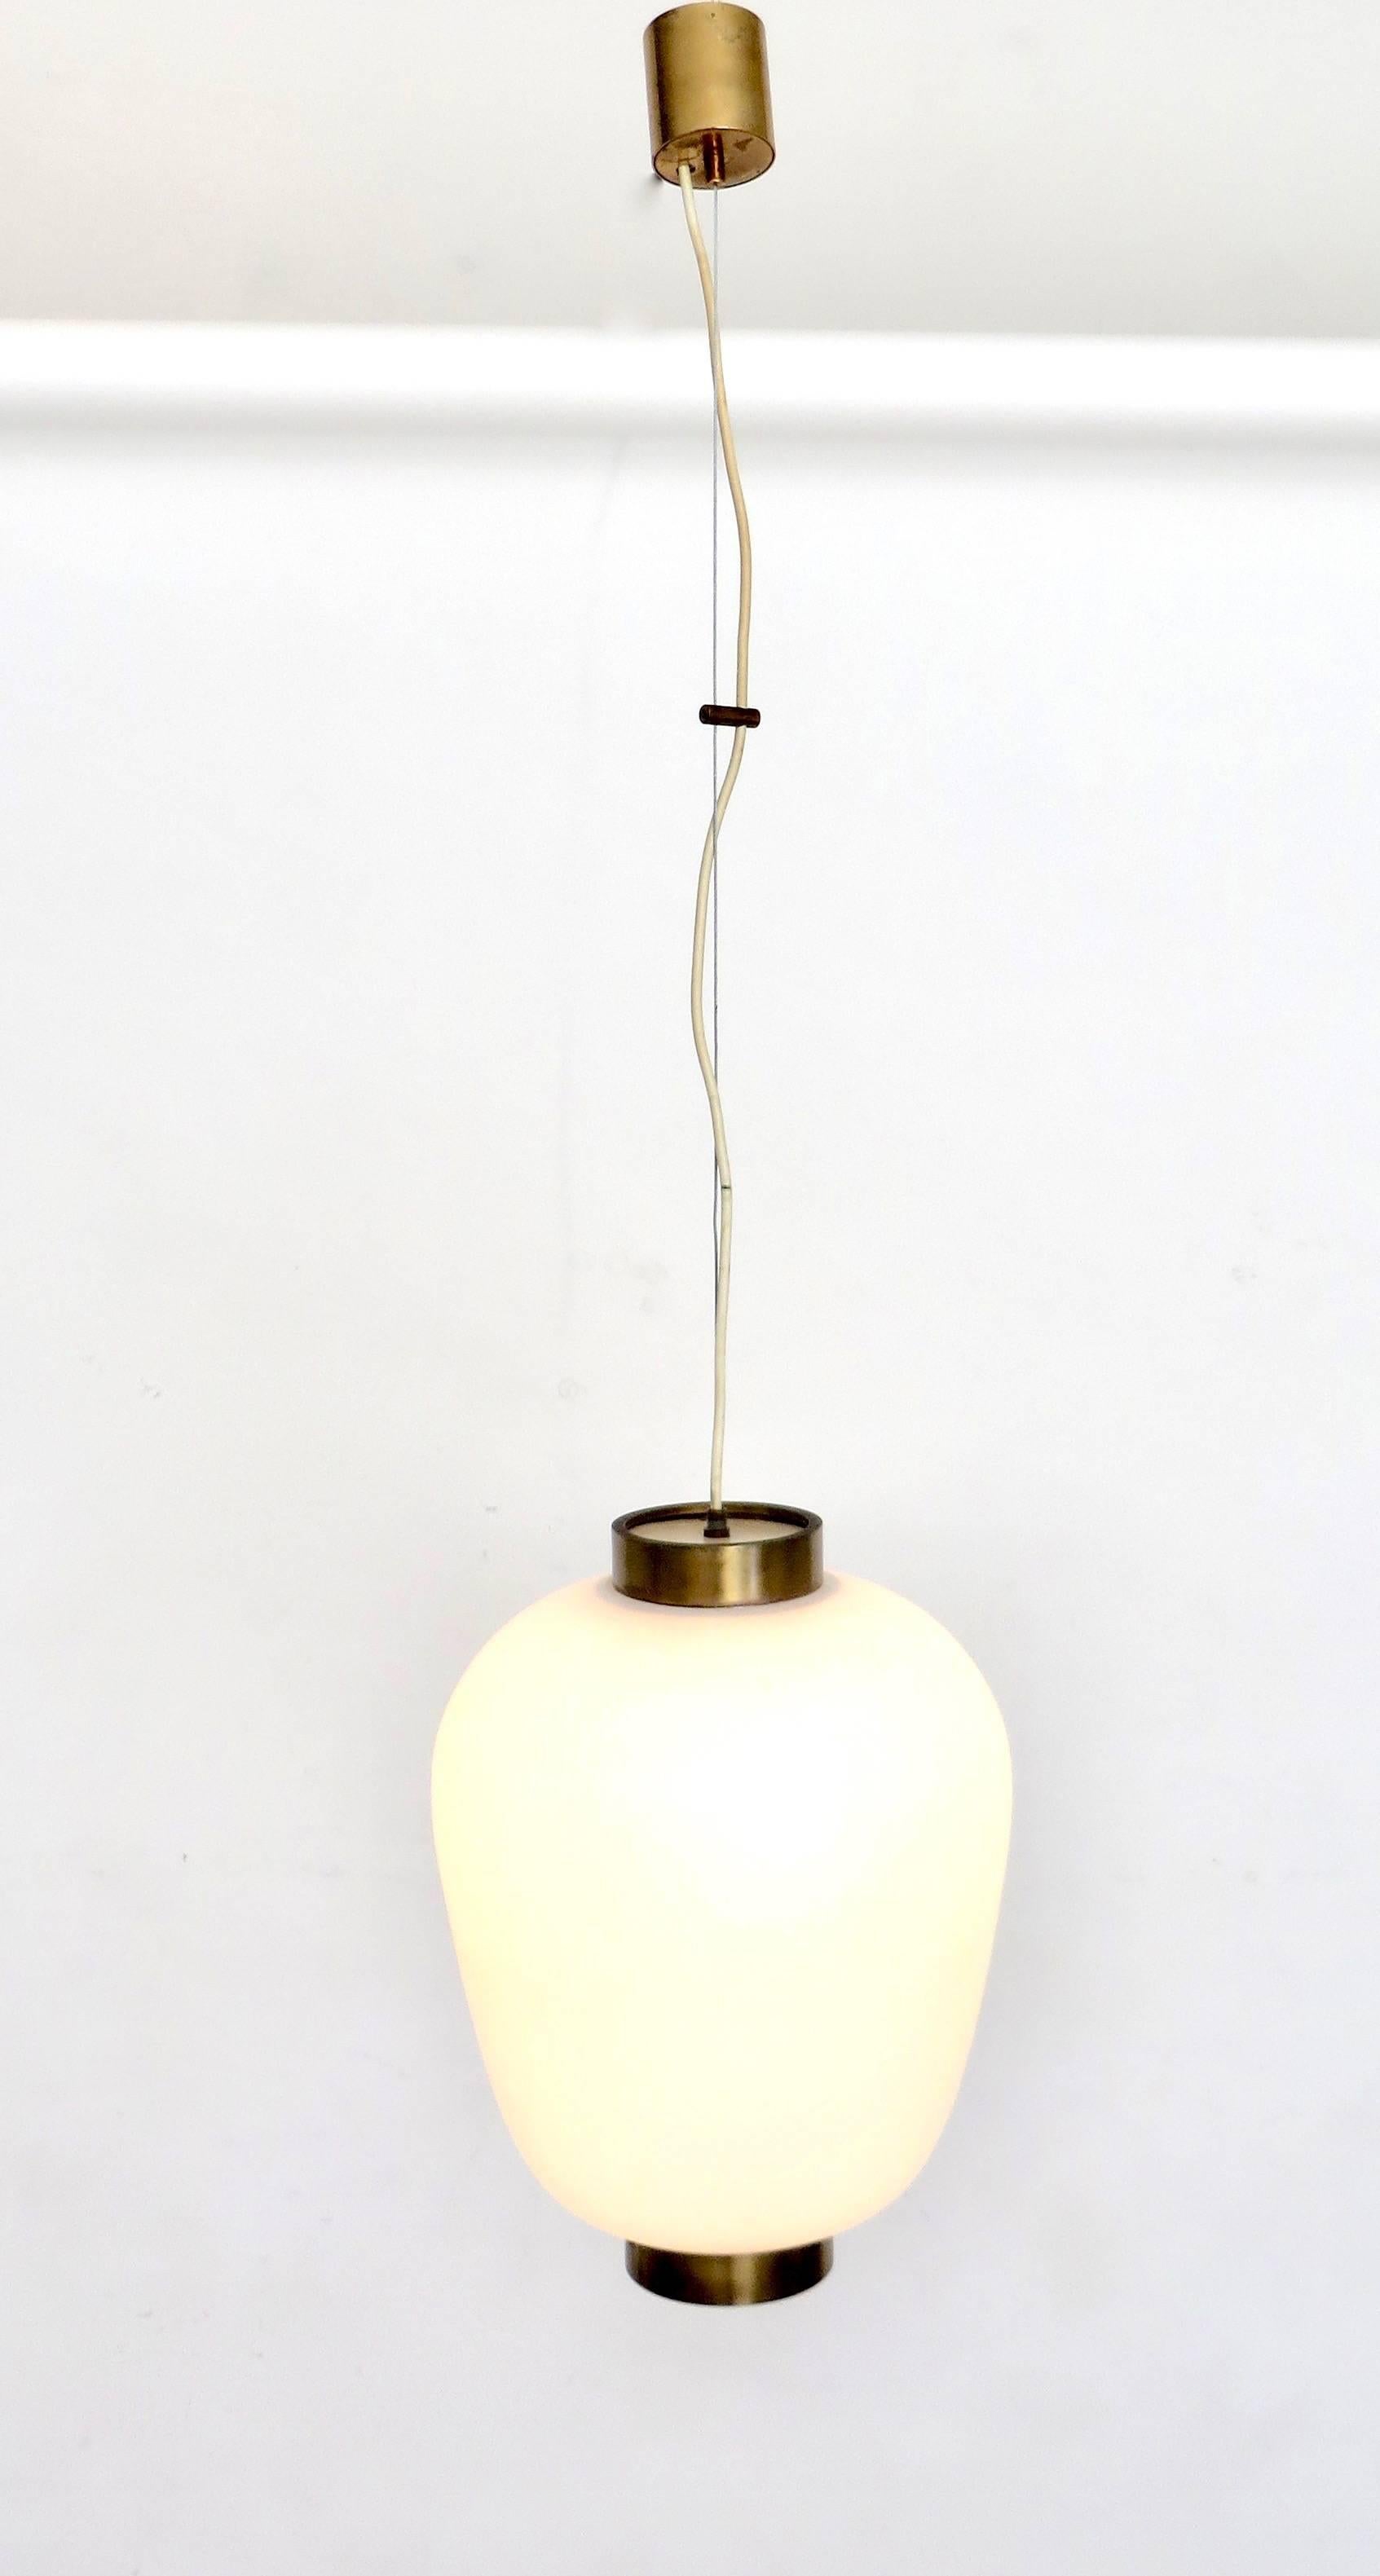 Mid-Century Modern Stilnovo Italian Pendant Light Fixture with Brushed Opaque Glass Diffuser